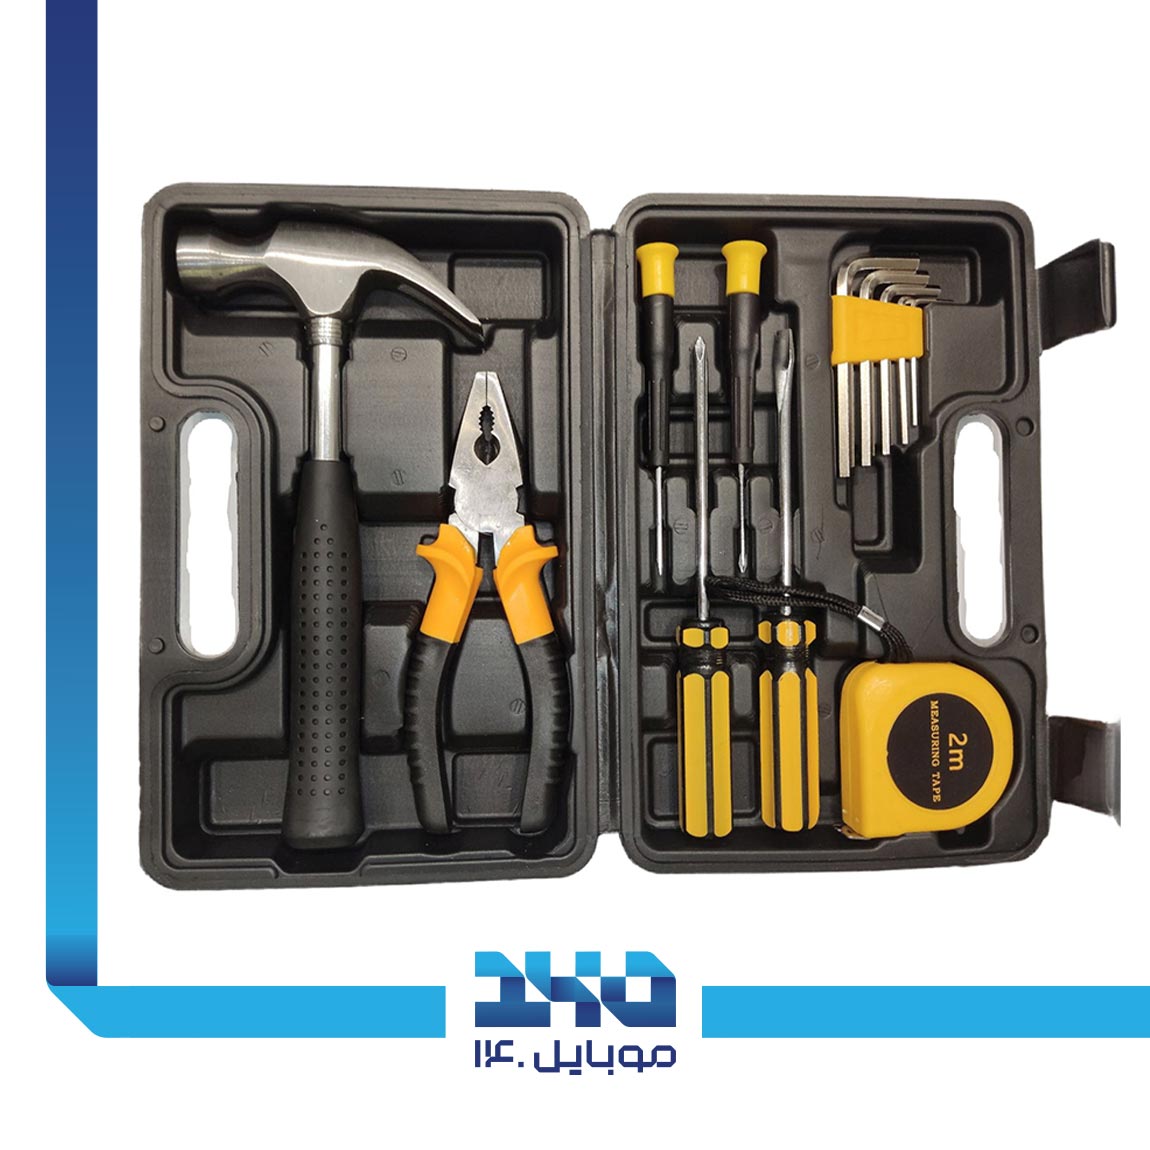 Lechgtools LC-8013A 13 in 1 Toolbox 4